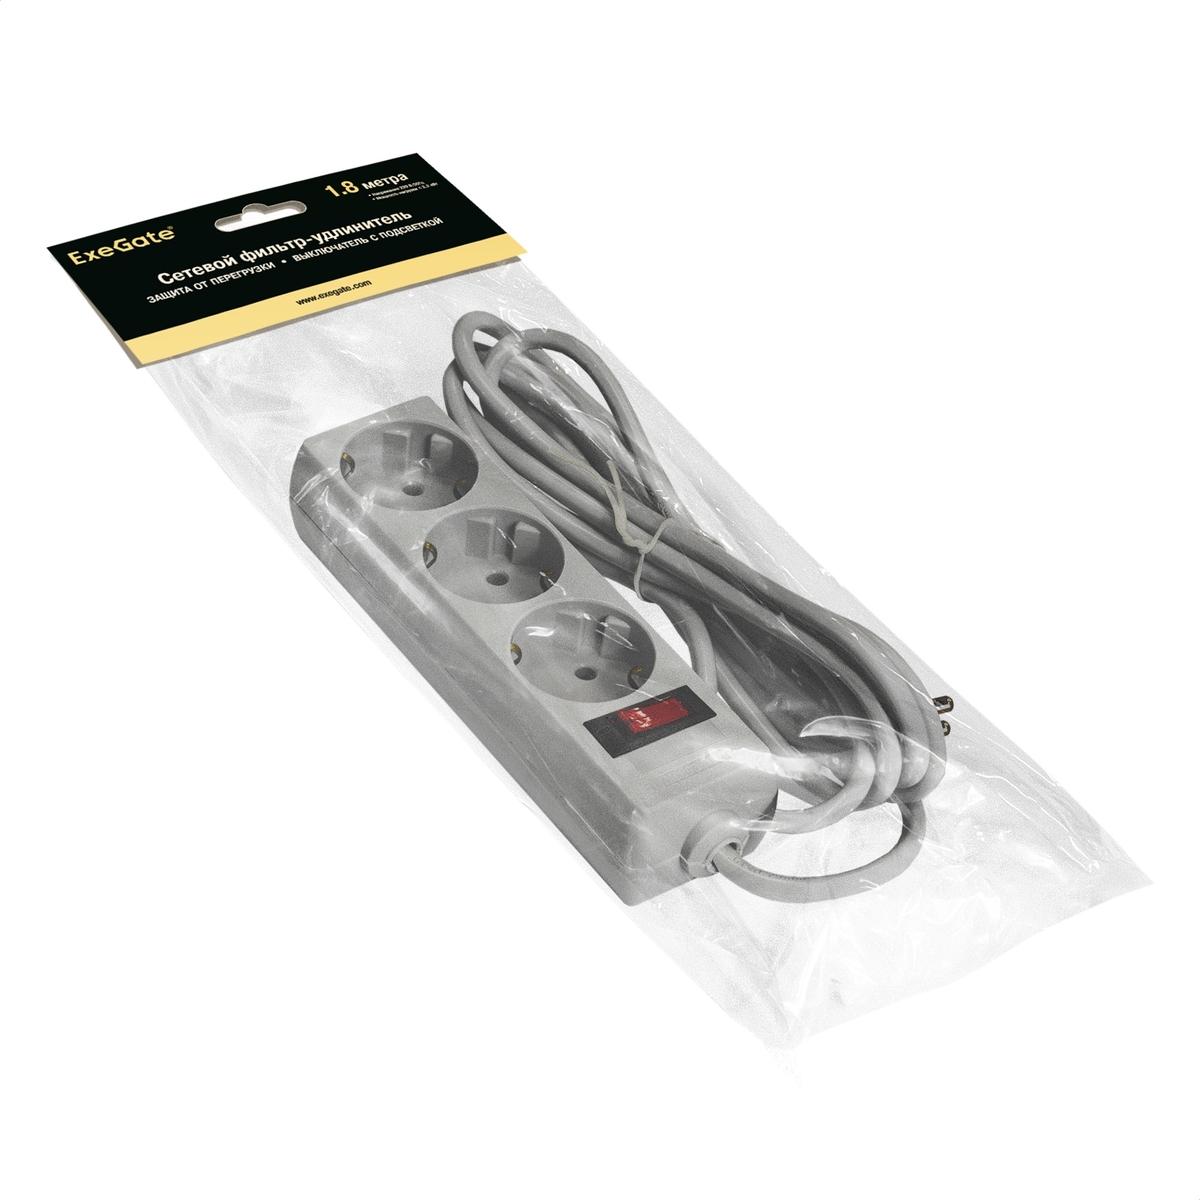 Surge protector ExeGate SP-3-1.8G